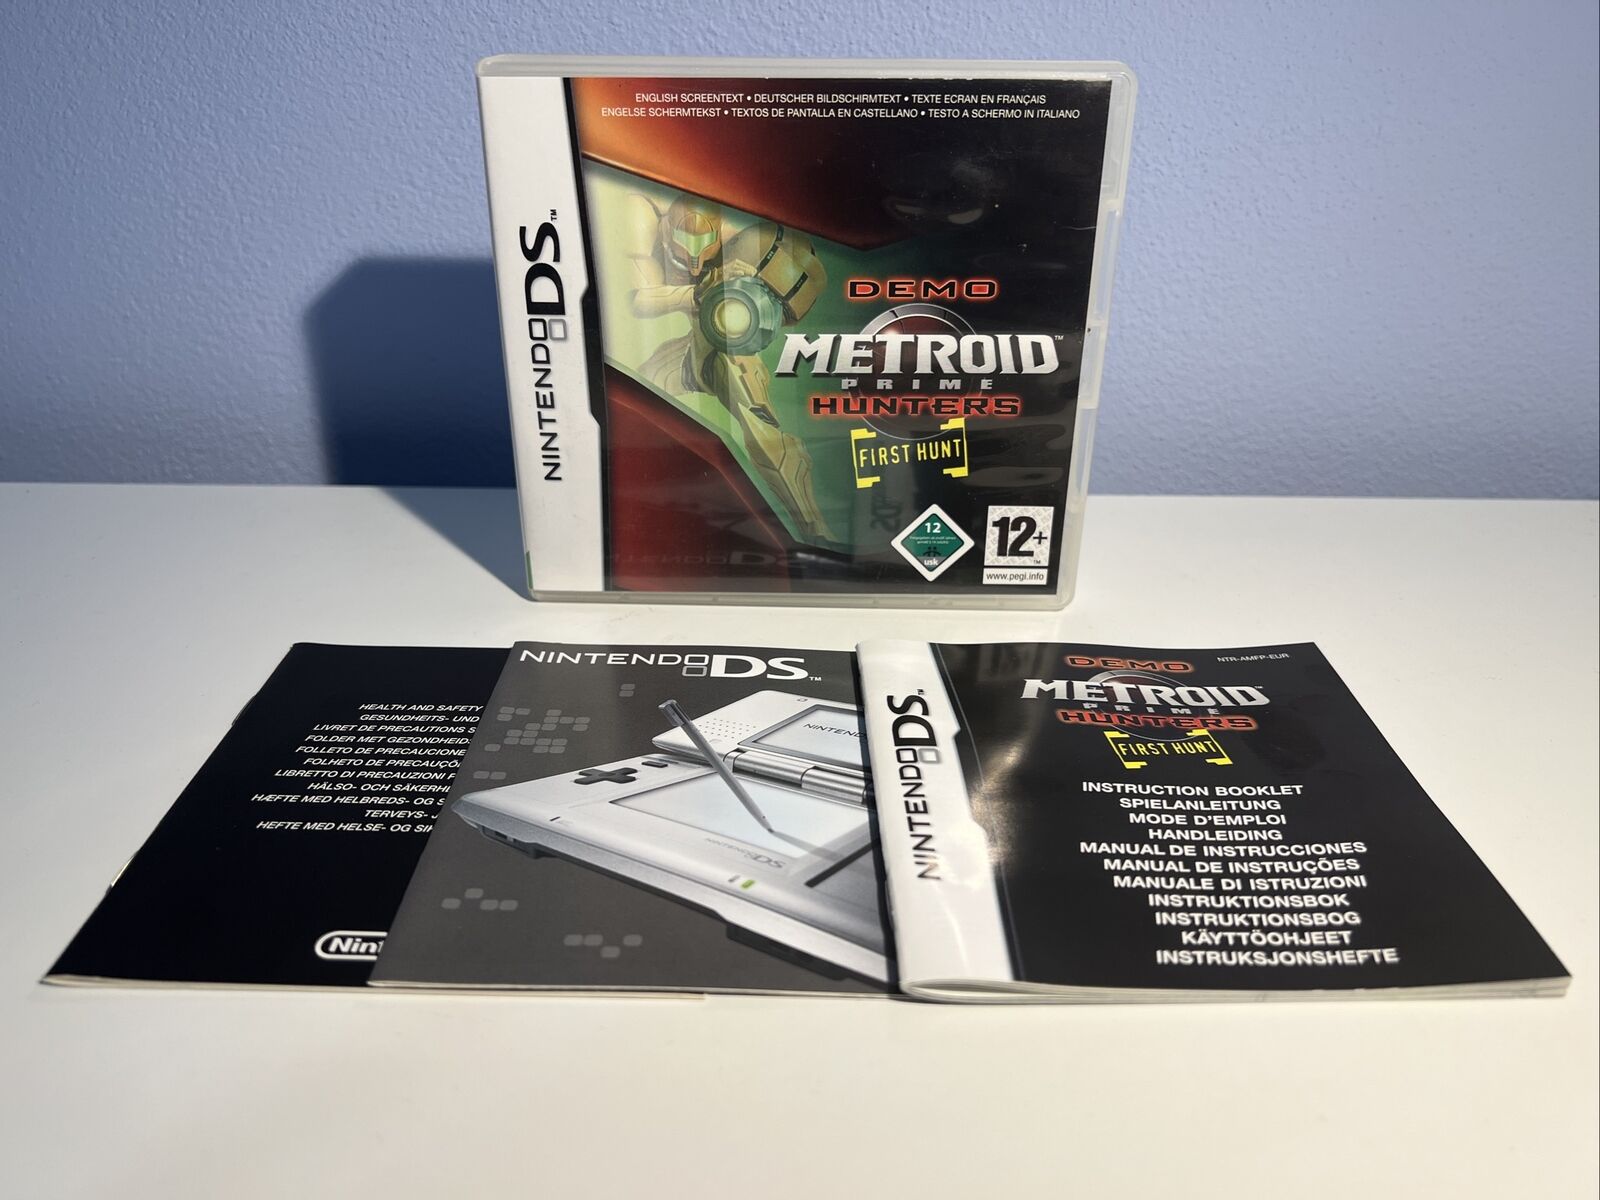 Nintendo-DS2DS3DS-Videogioco-Metroid-Prime-Hunters-First-Hunt-133908530163-6